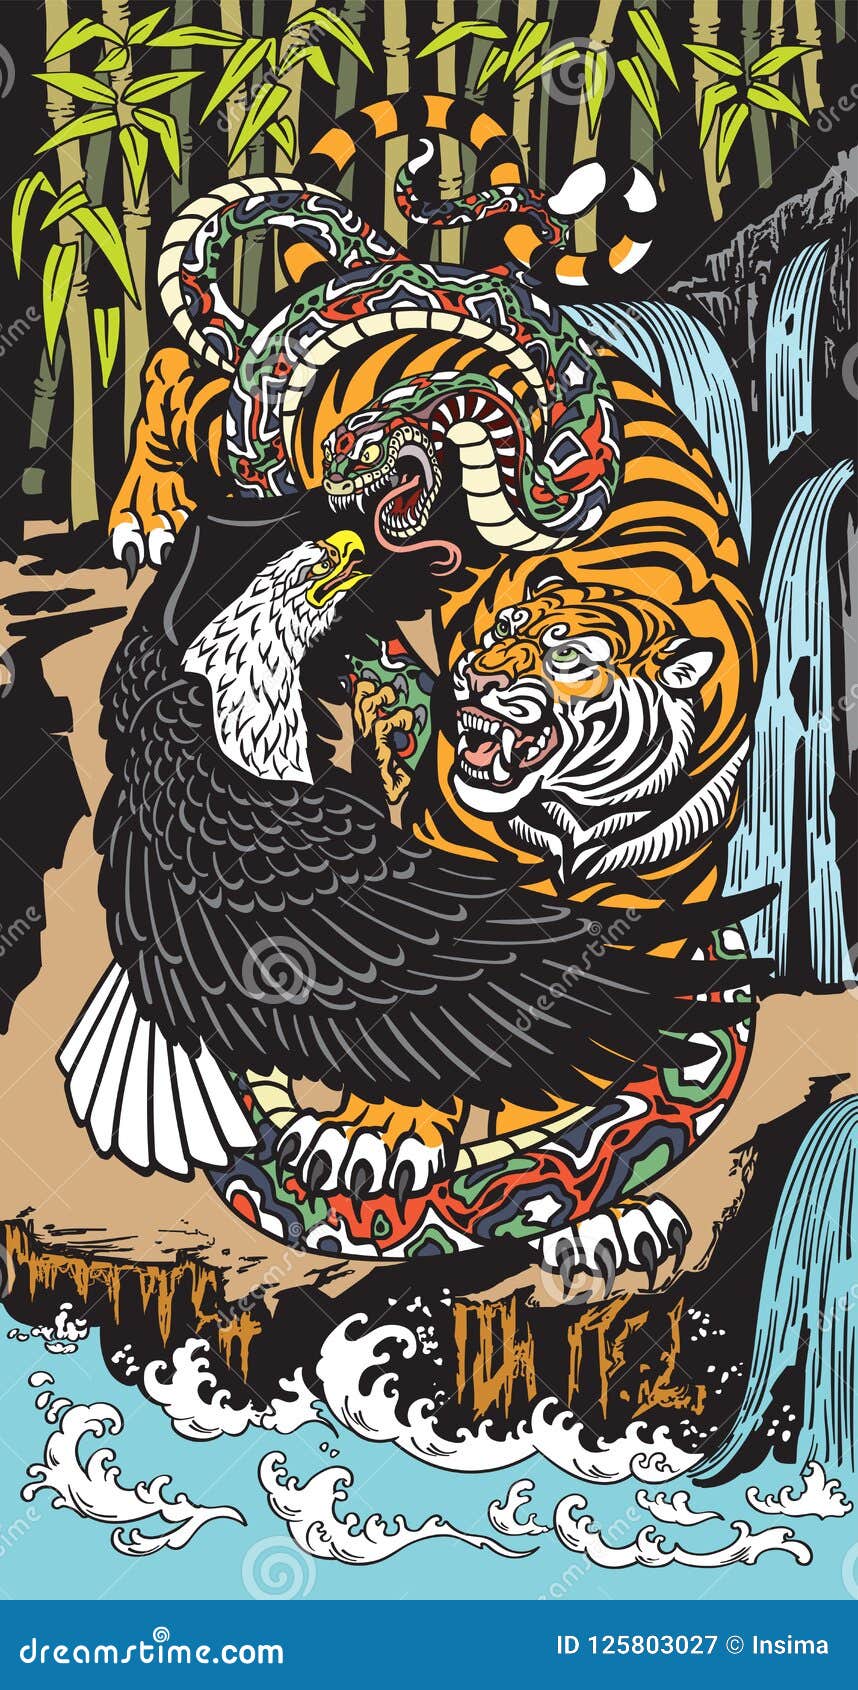 ic tiger eagle and snake in a landscape